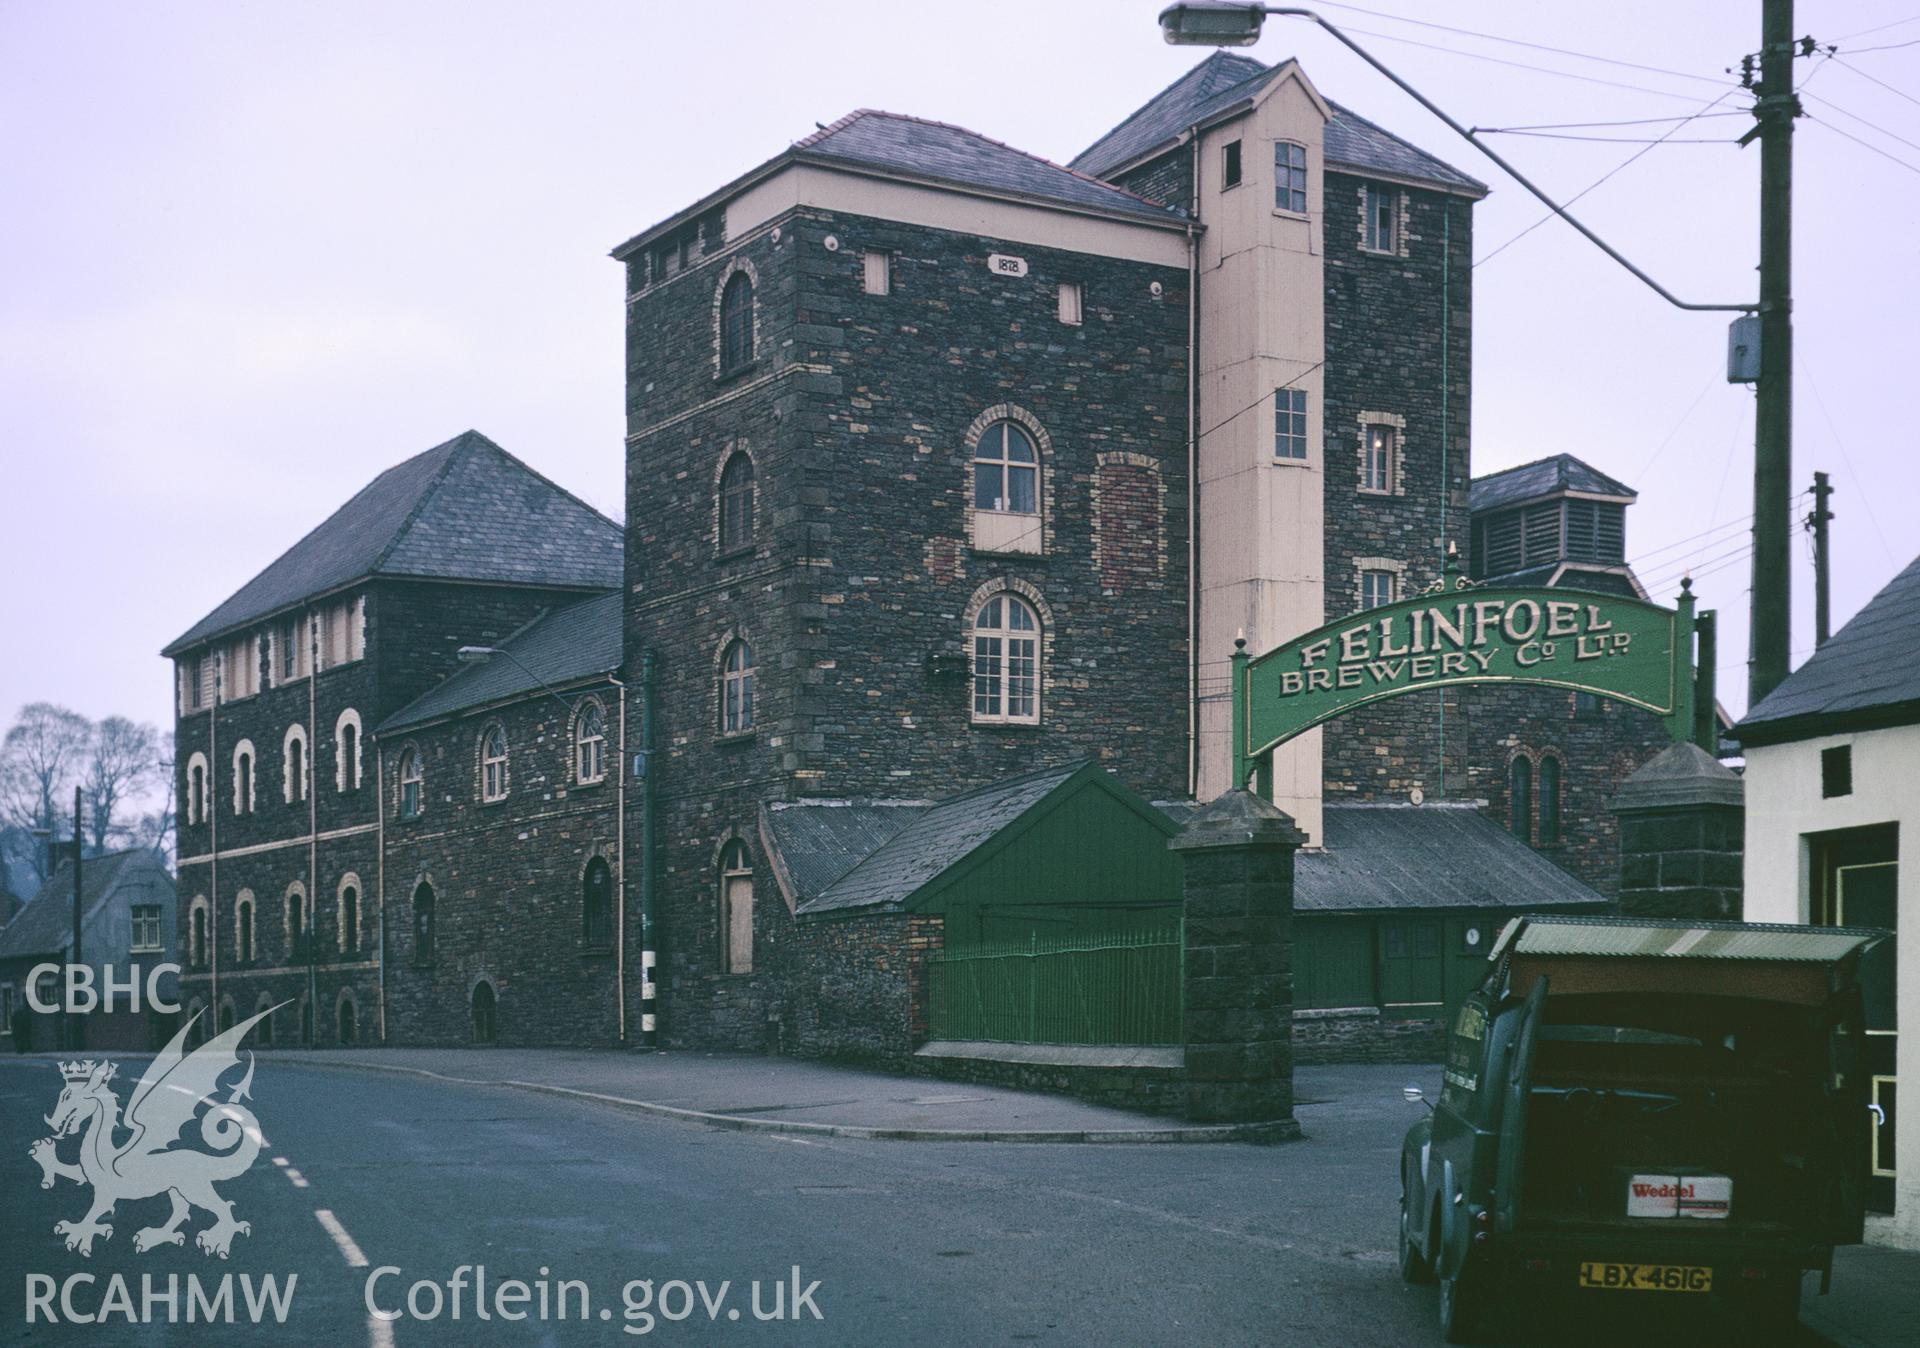 35mm colour slide showing Felinfoel Brewery, Llanelli, Carmarthenshire, by Dylan Roberts, undated.